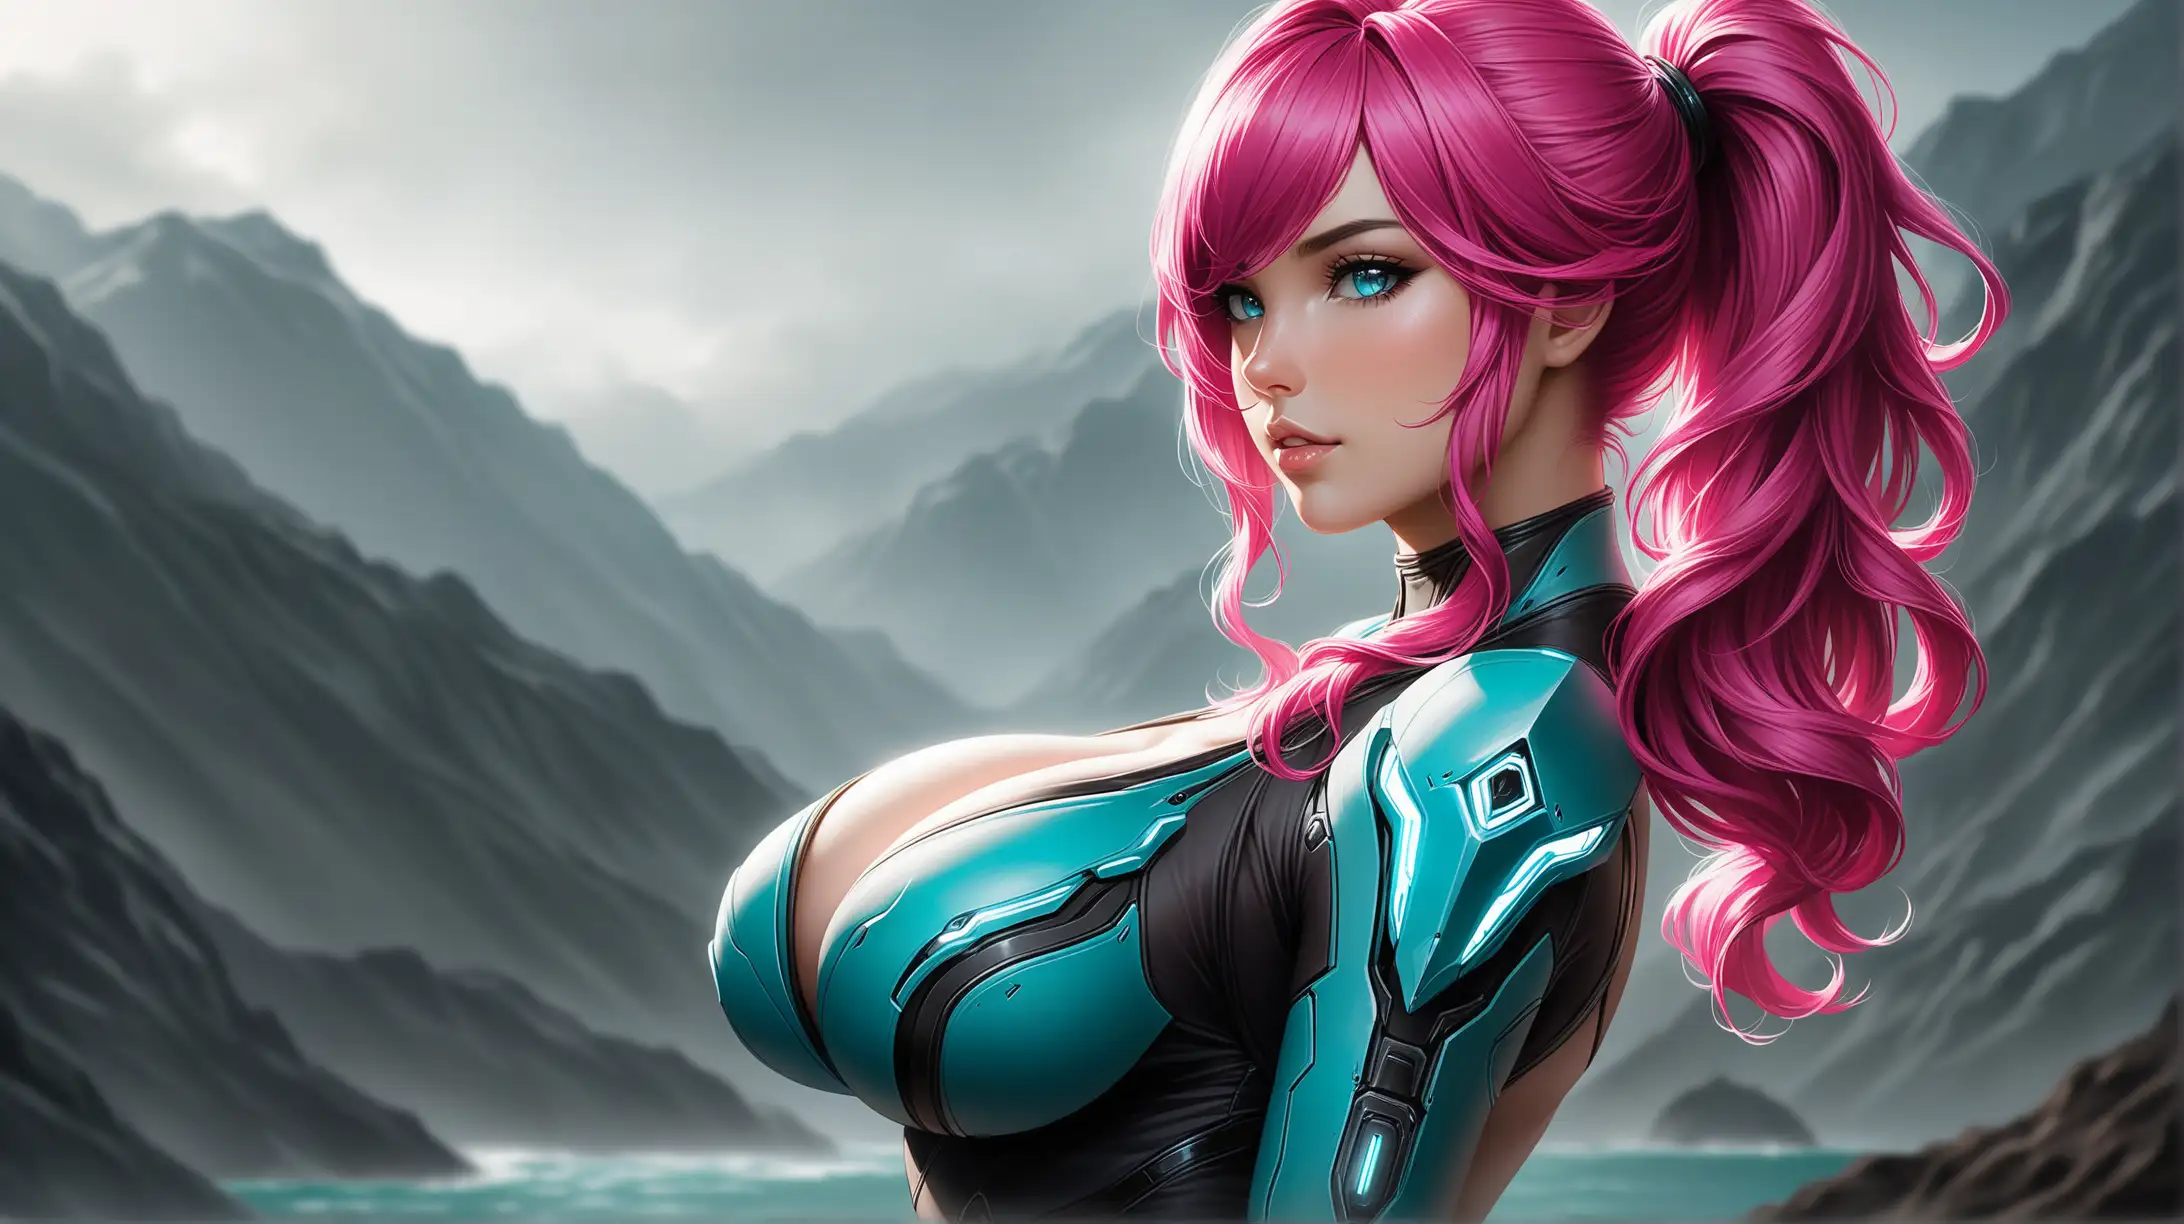 Seductive Woman with Hot Pink Curly Hair in Warframeinspired Outfit